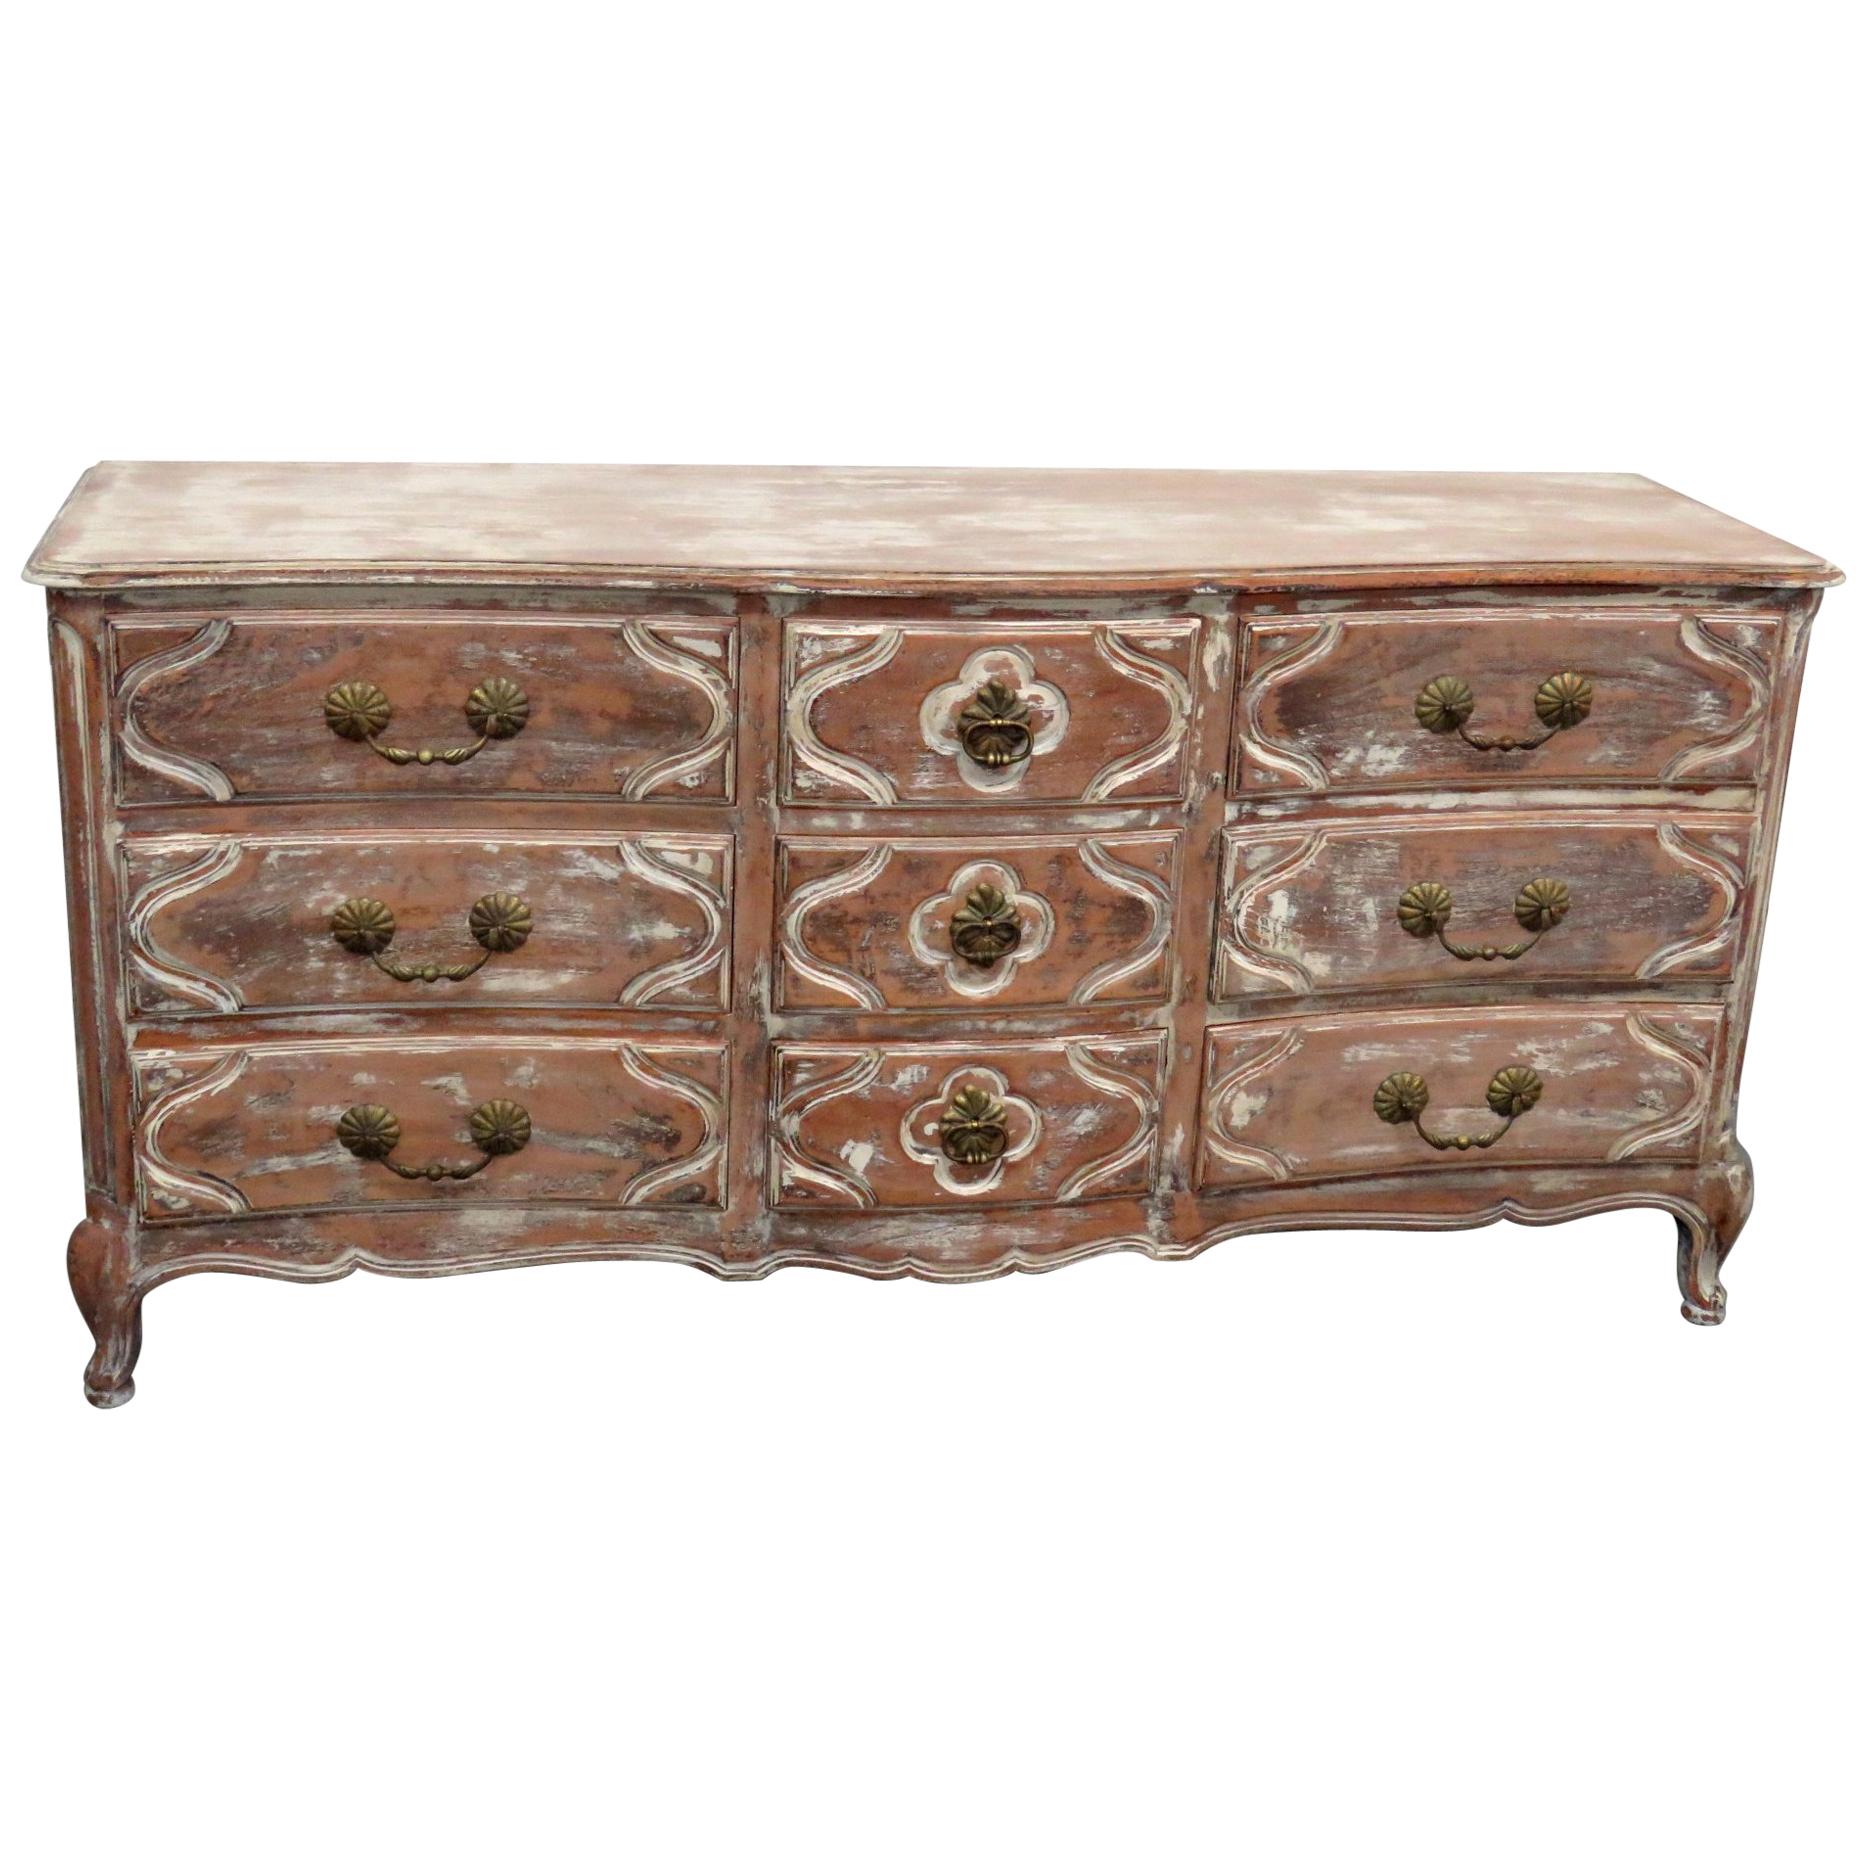 Signed Auffray Country French Louis XV Distressed Painted Triple Dresser